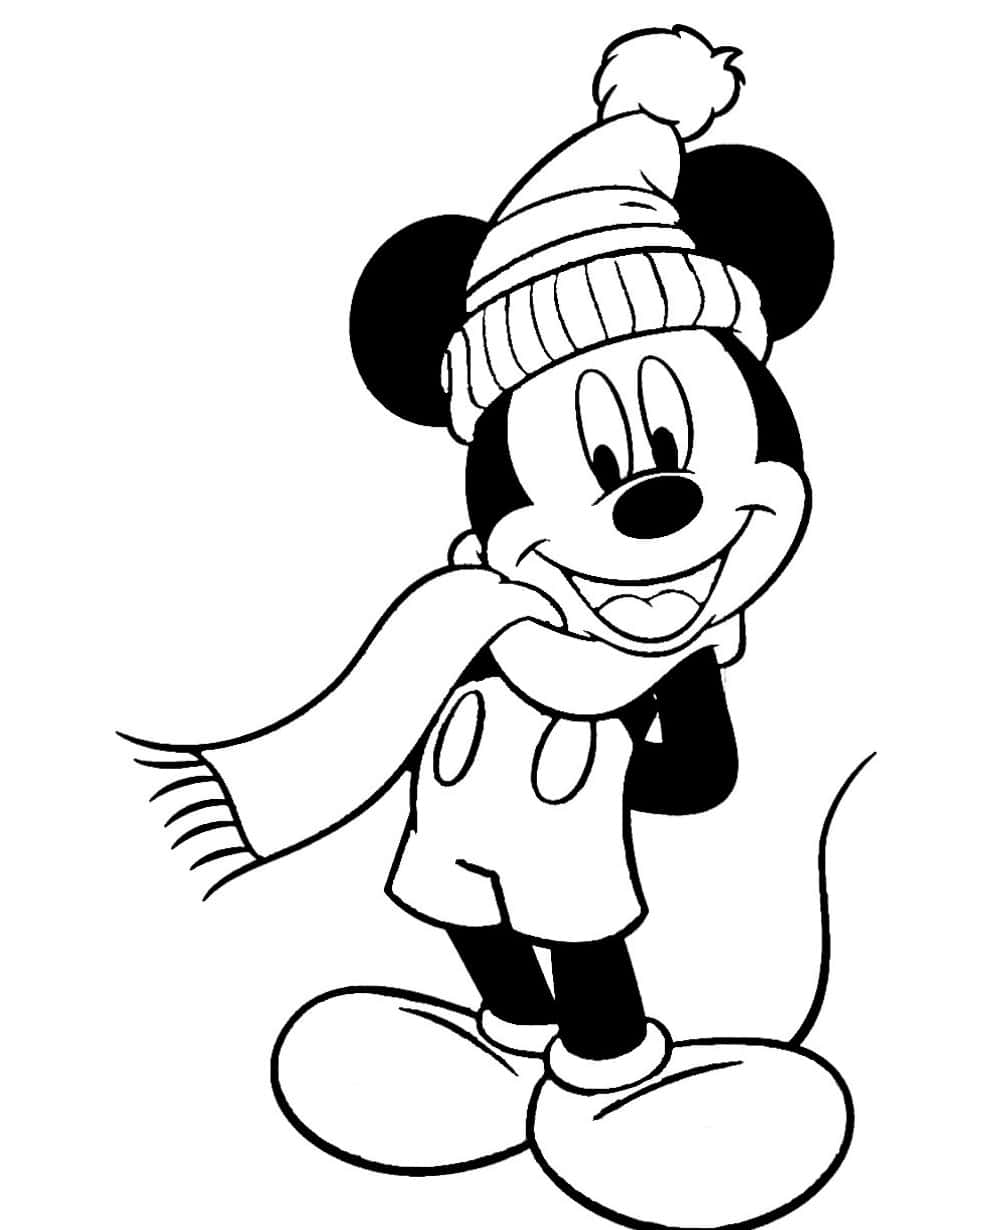 Fun Colouring Activity with Mickey and Minnie Mouse